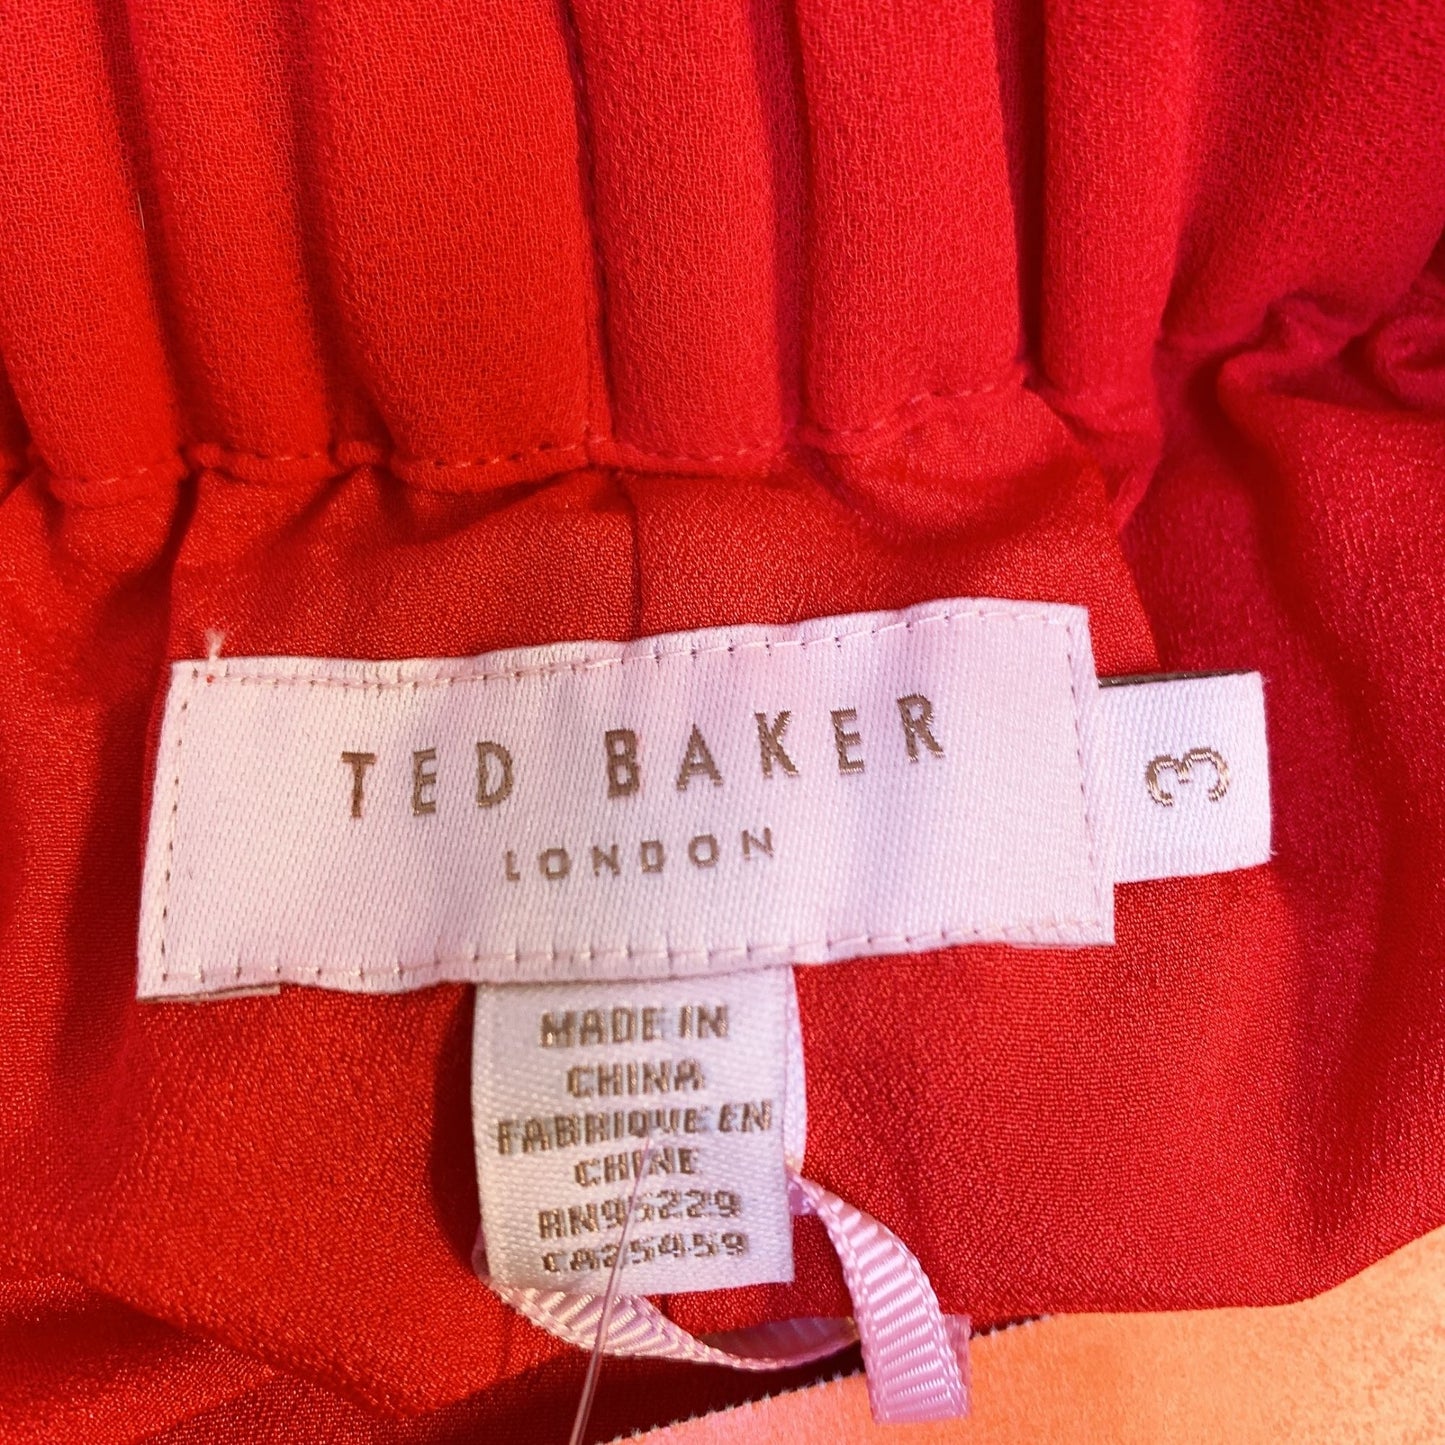 Ted Baker London NWT Red/Multi-colored High-low Pleated Dress w/Self Belt Size Small